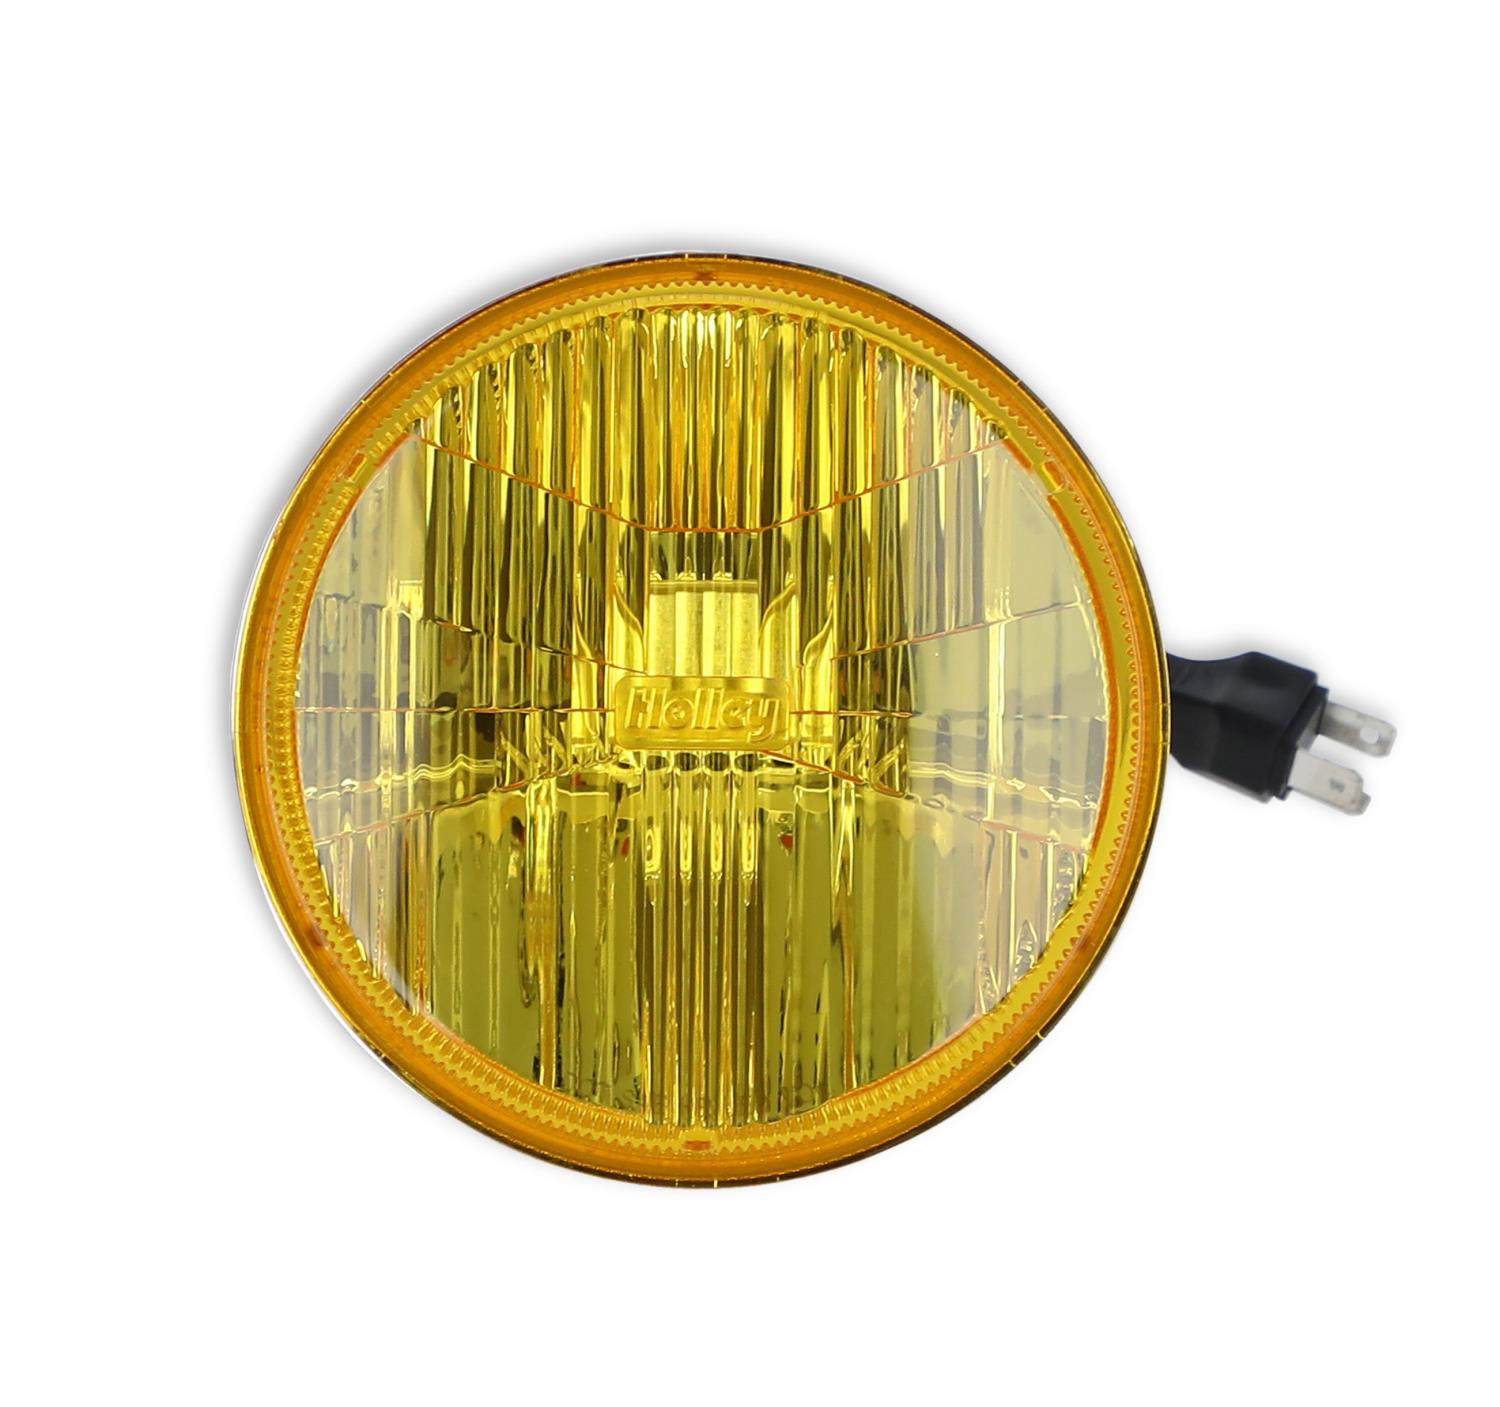 LFRB106 RetroBright LED 5 3/4 in. Round Headlight for Select 1957-1992 Vehicles [Yellow-High Beam Only]